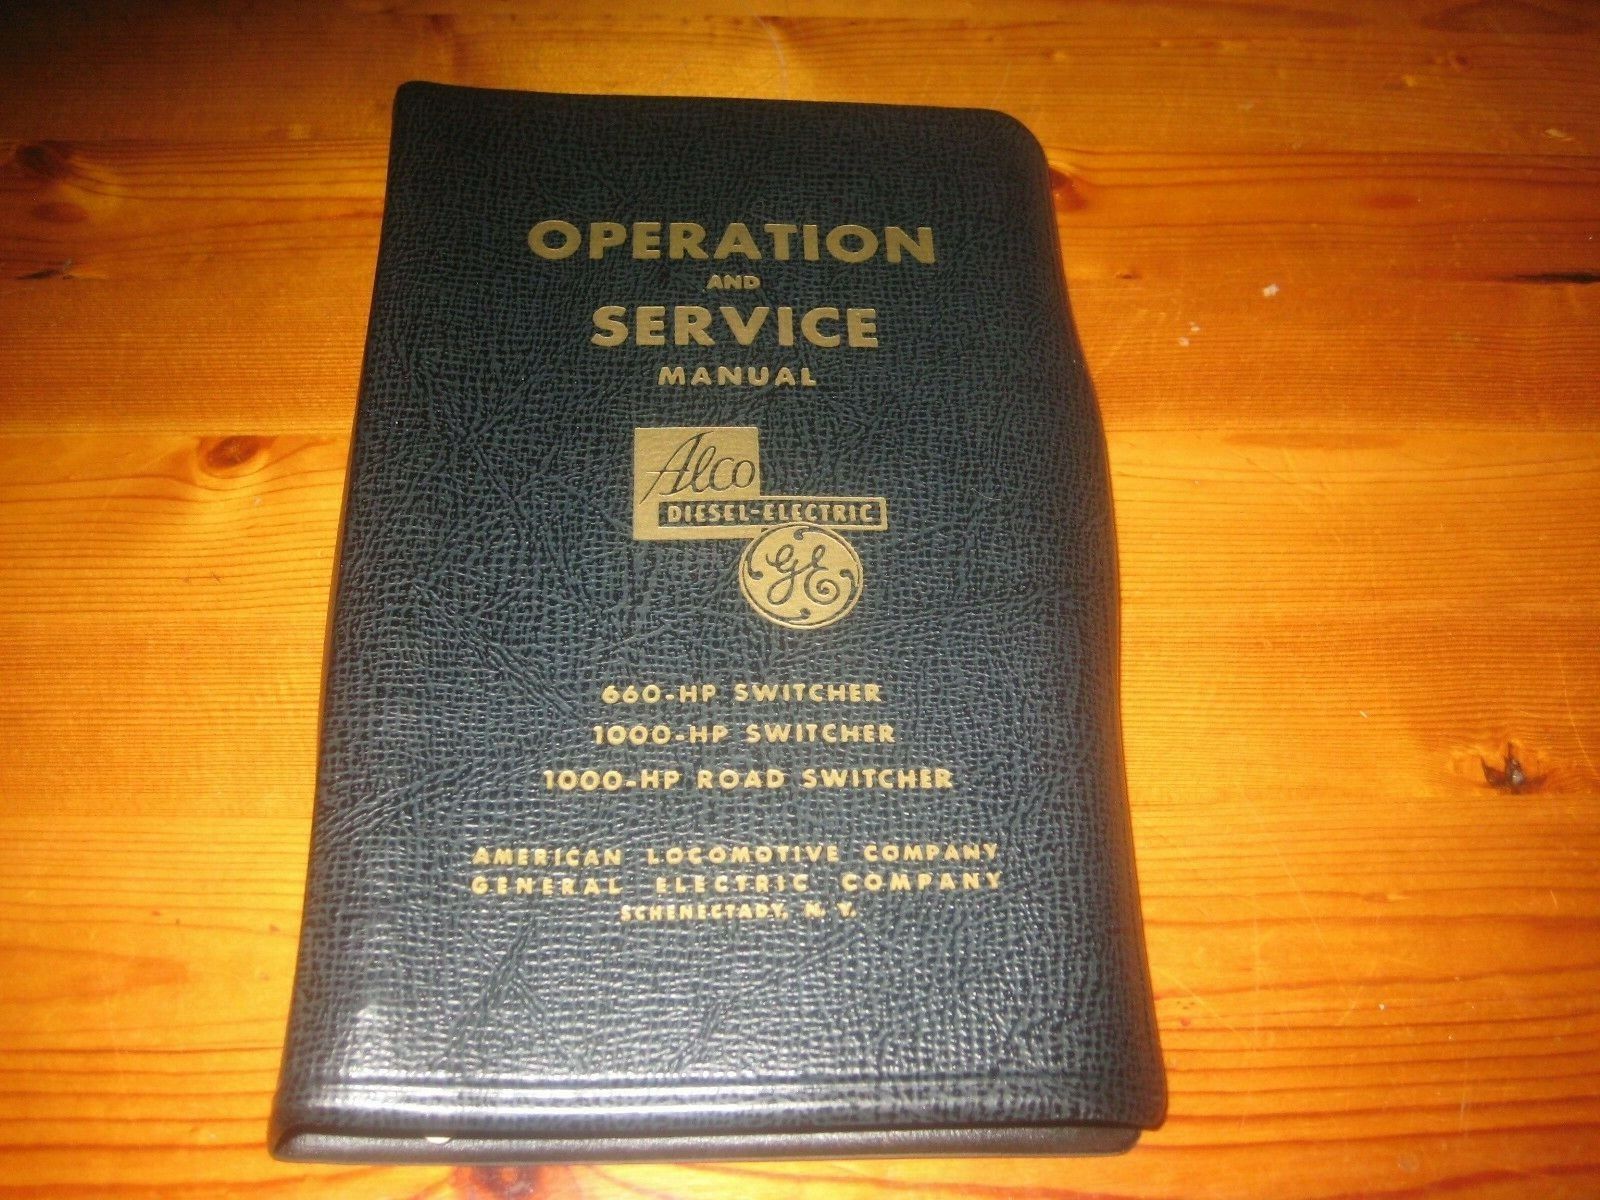 Operation and Service manual ALco Ge Diesel Electric Locomotive 1951